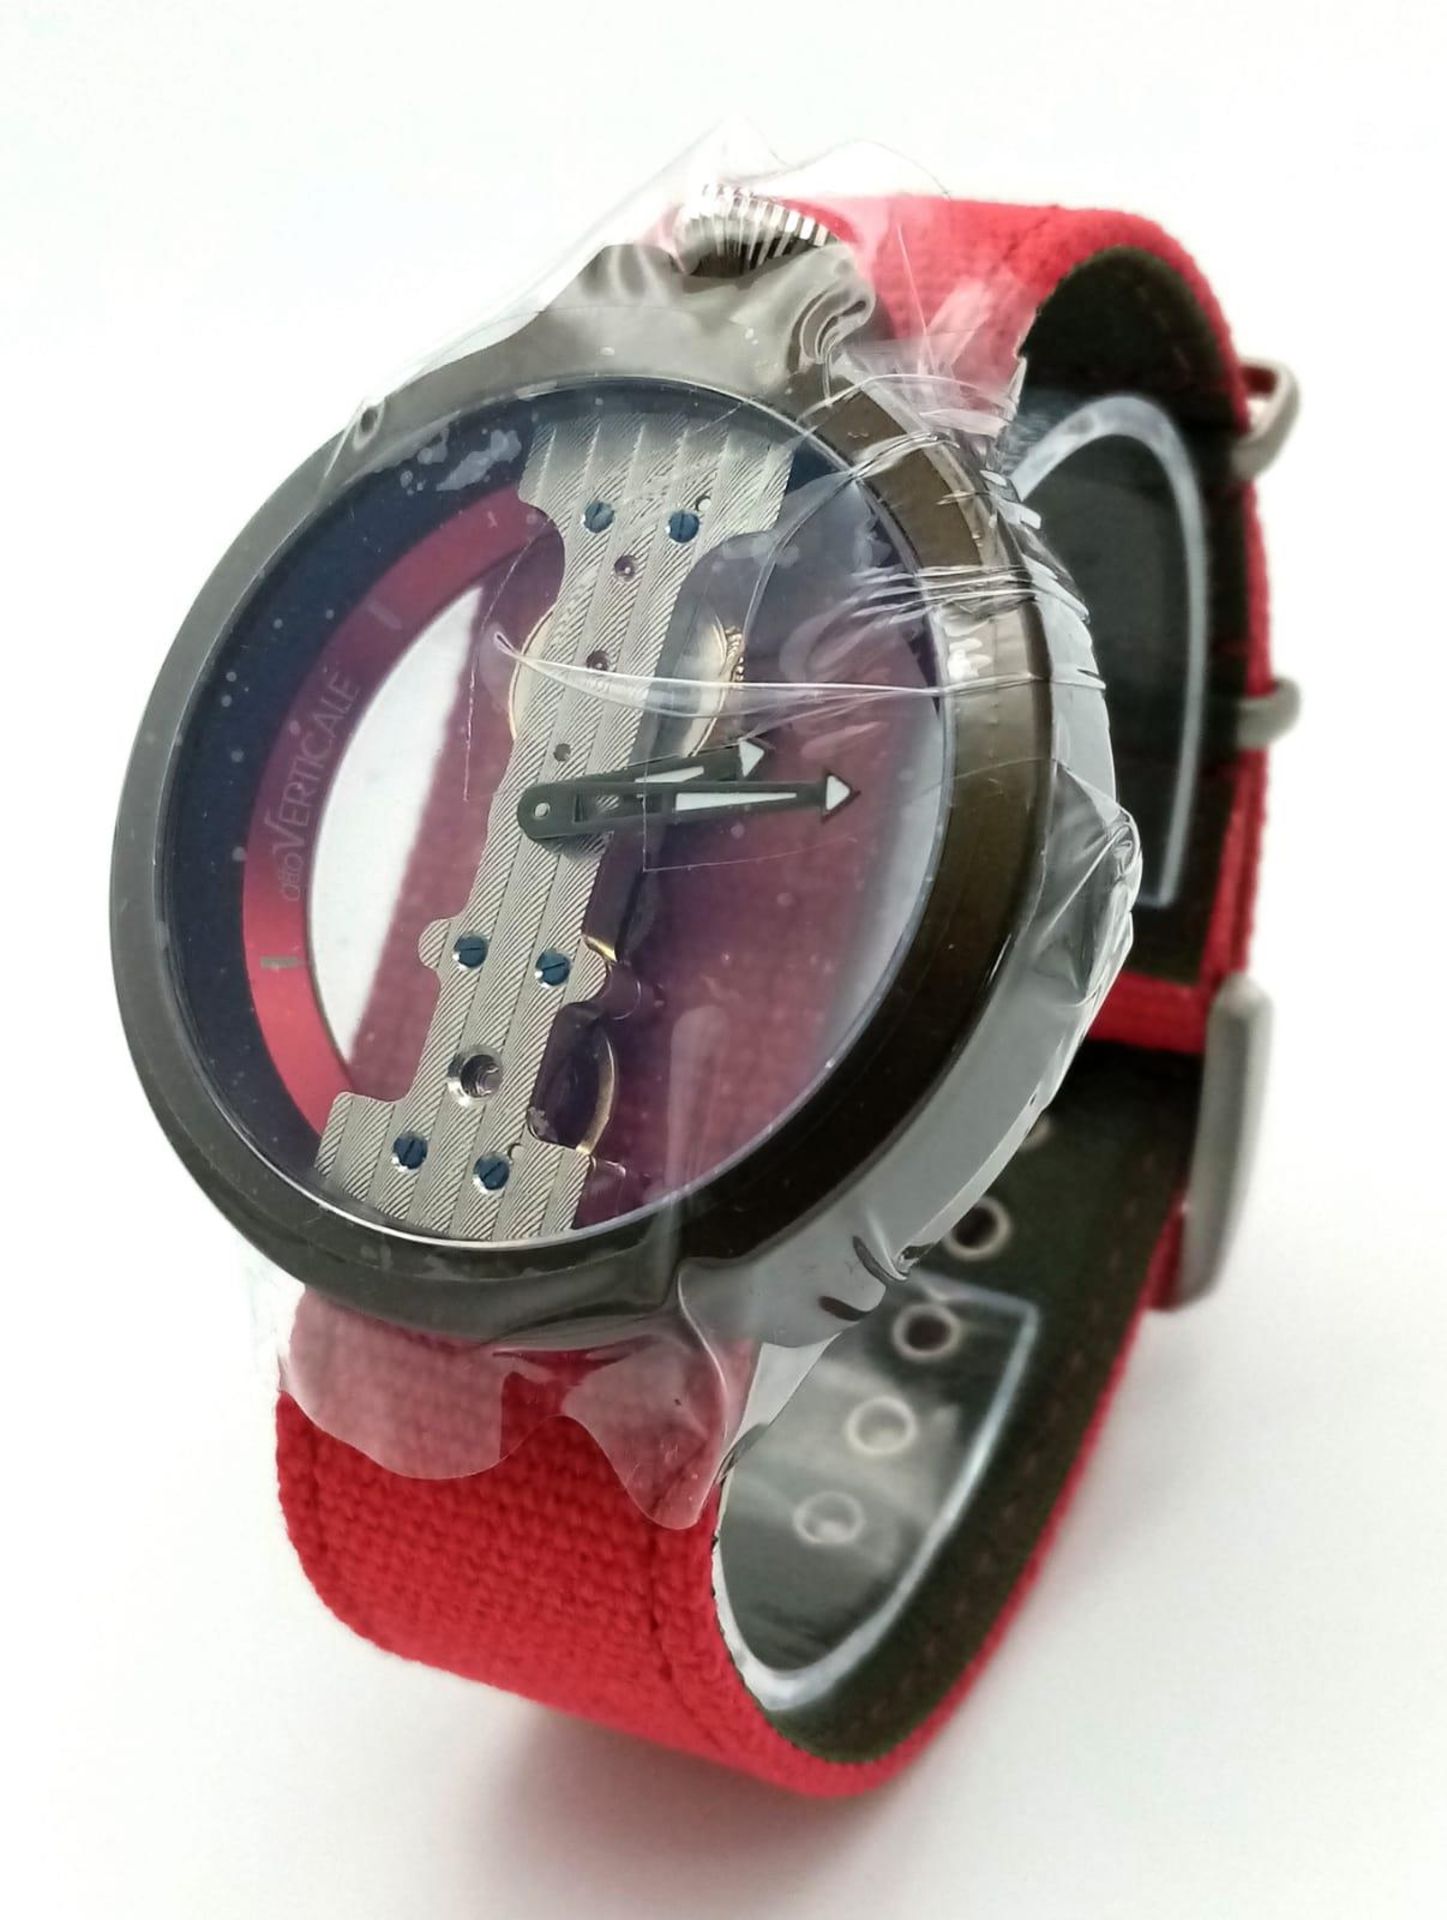 A Gents Verticale Mechanical Skeleton Watch. Red textile strap. Case - 42mm. Top winder. In